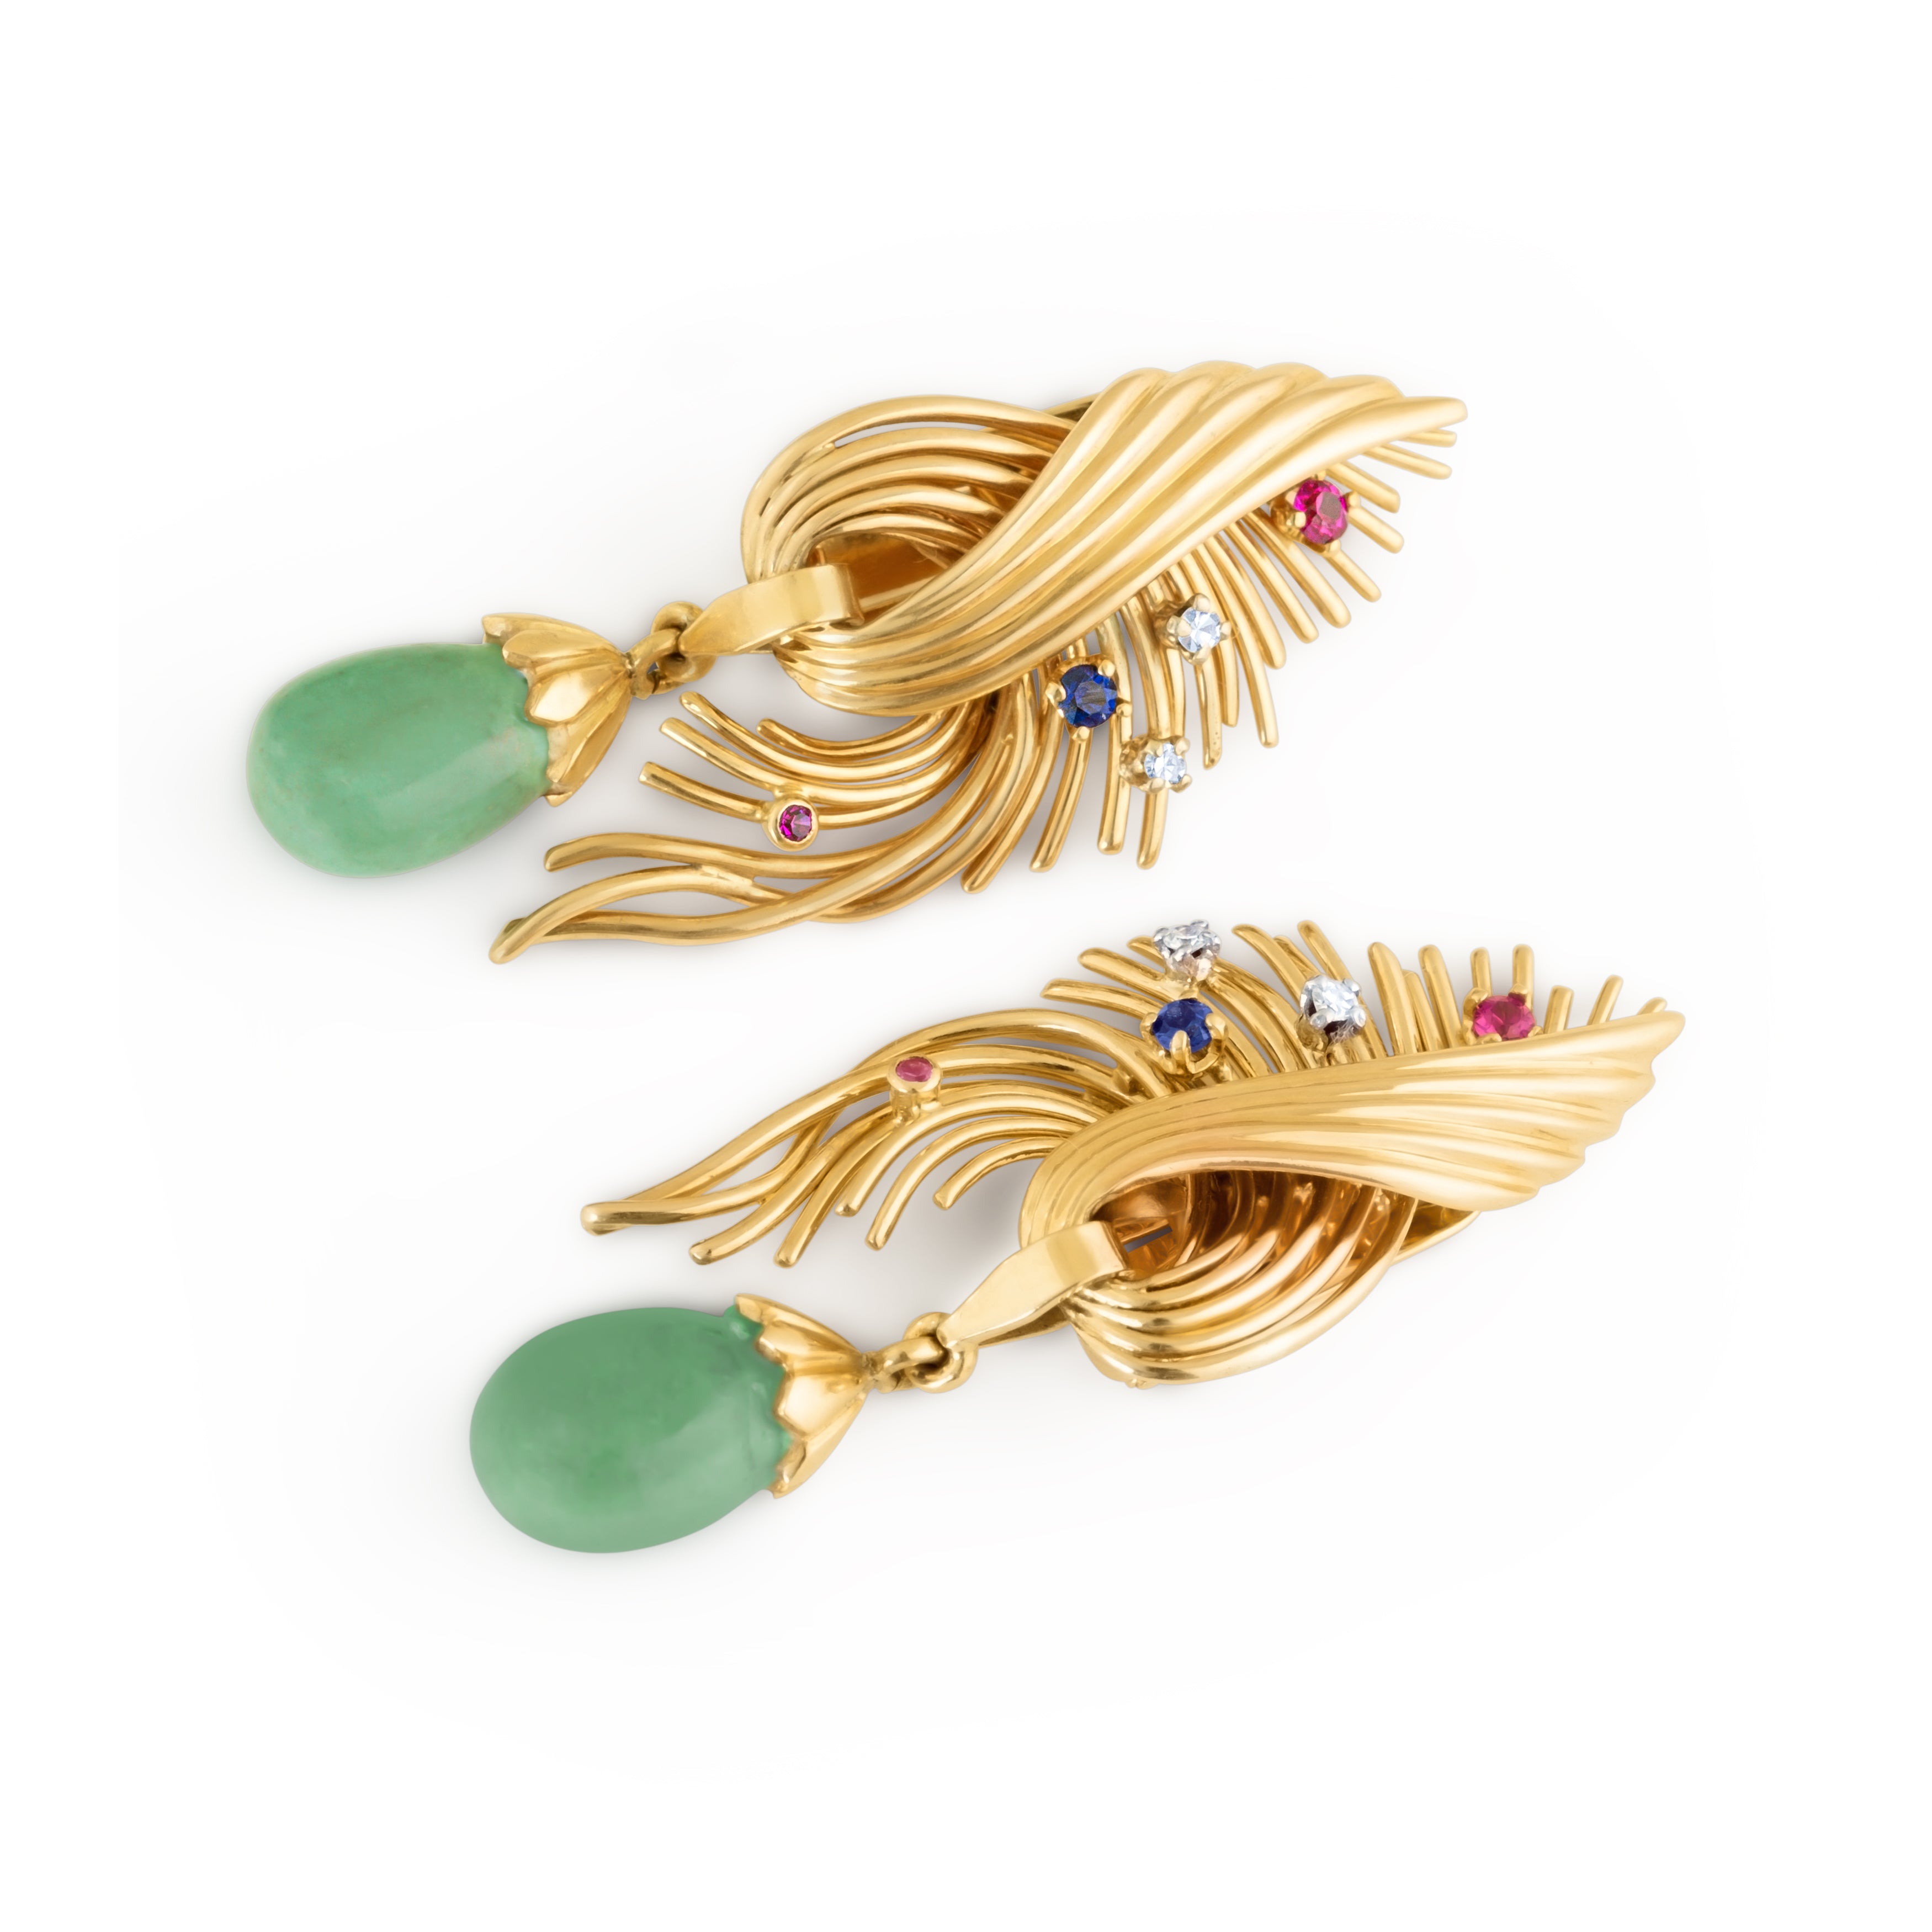 1980s-1990s gold spray earrings with gemstones and turquoise drops.